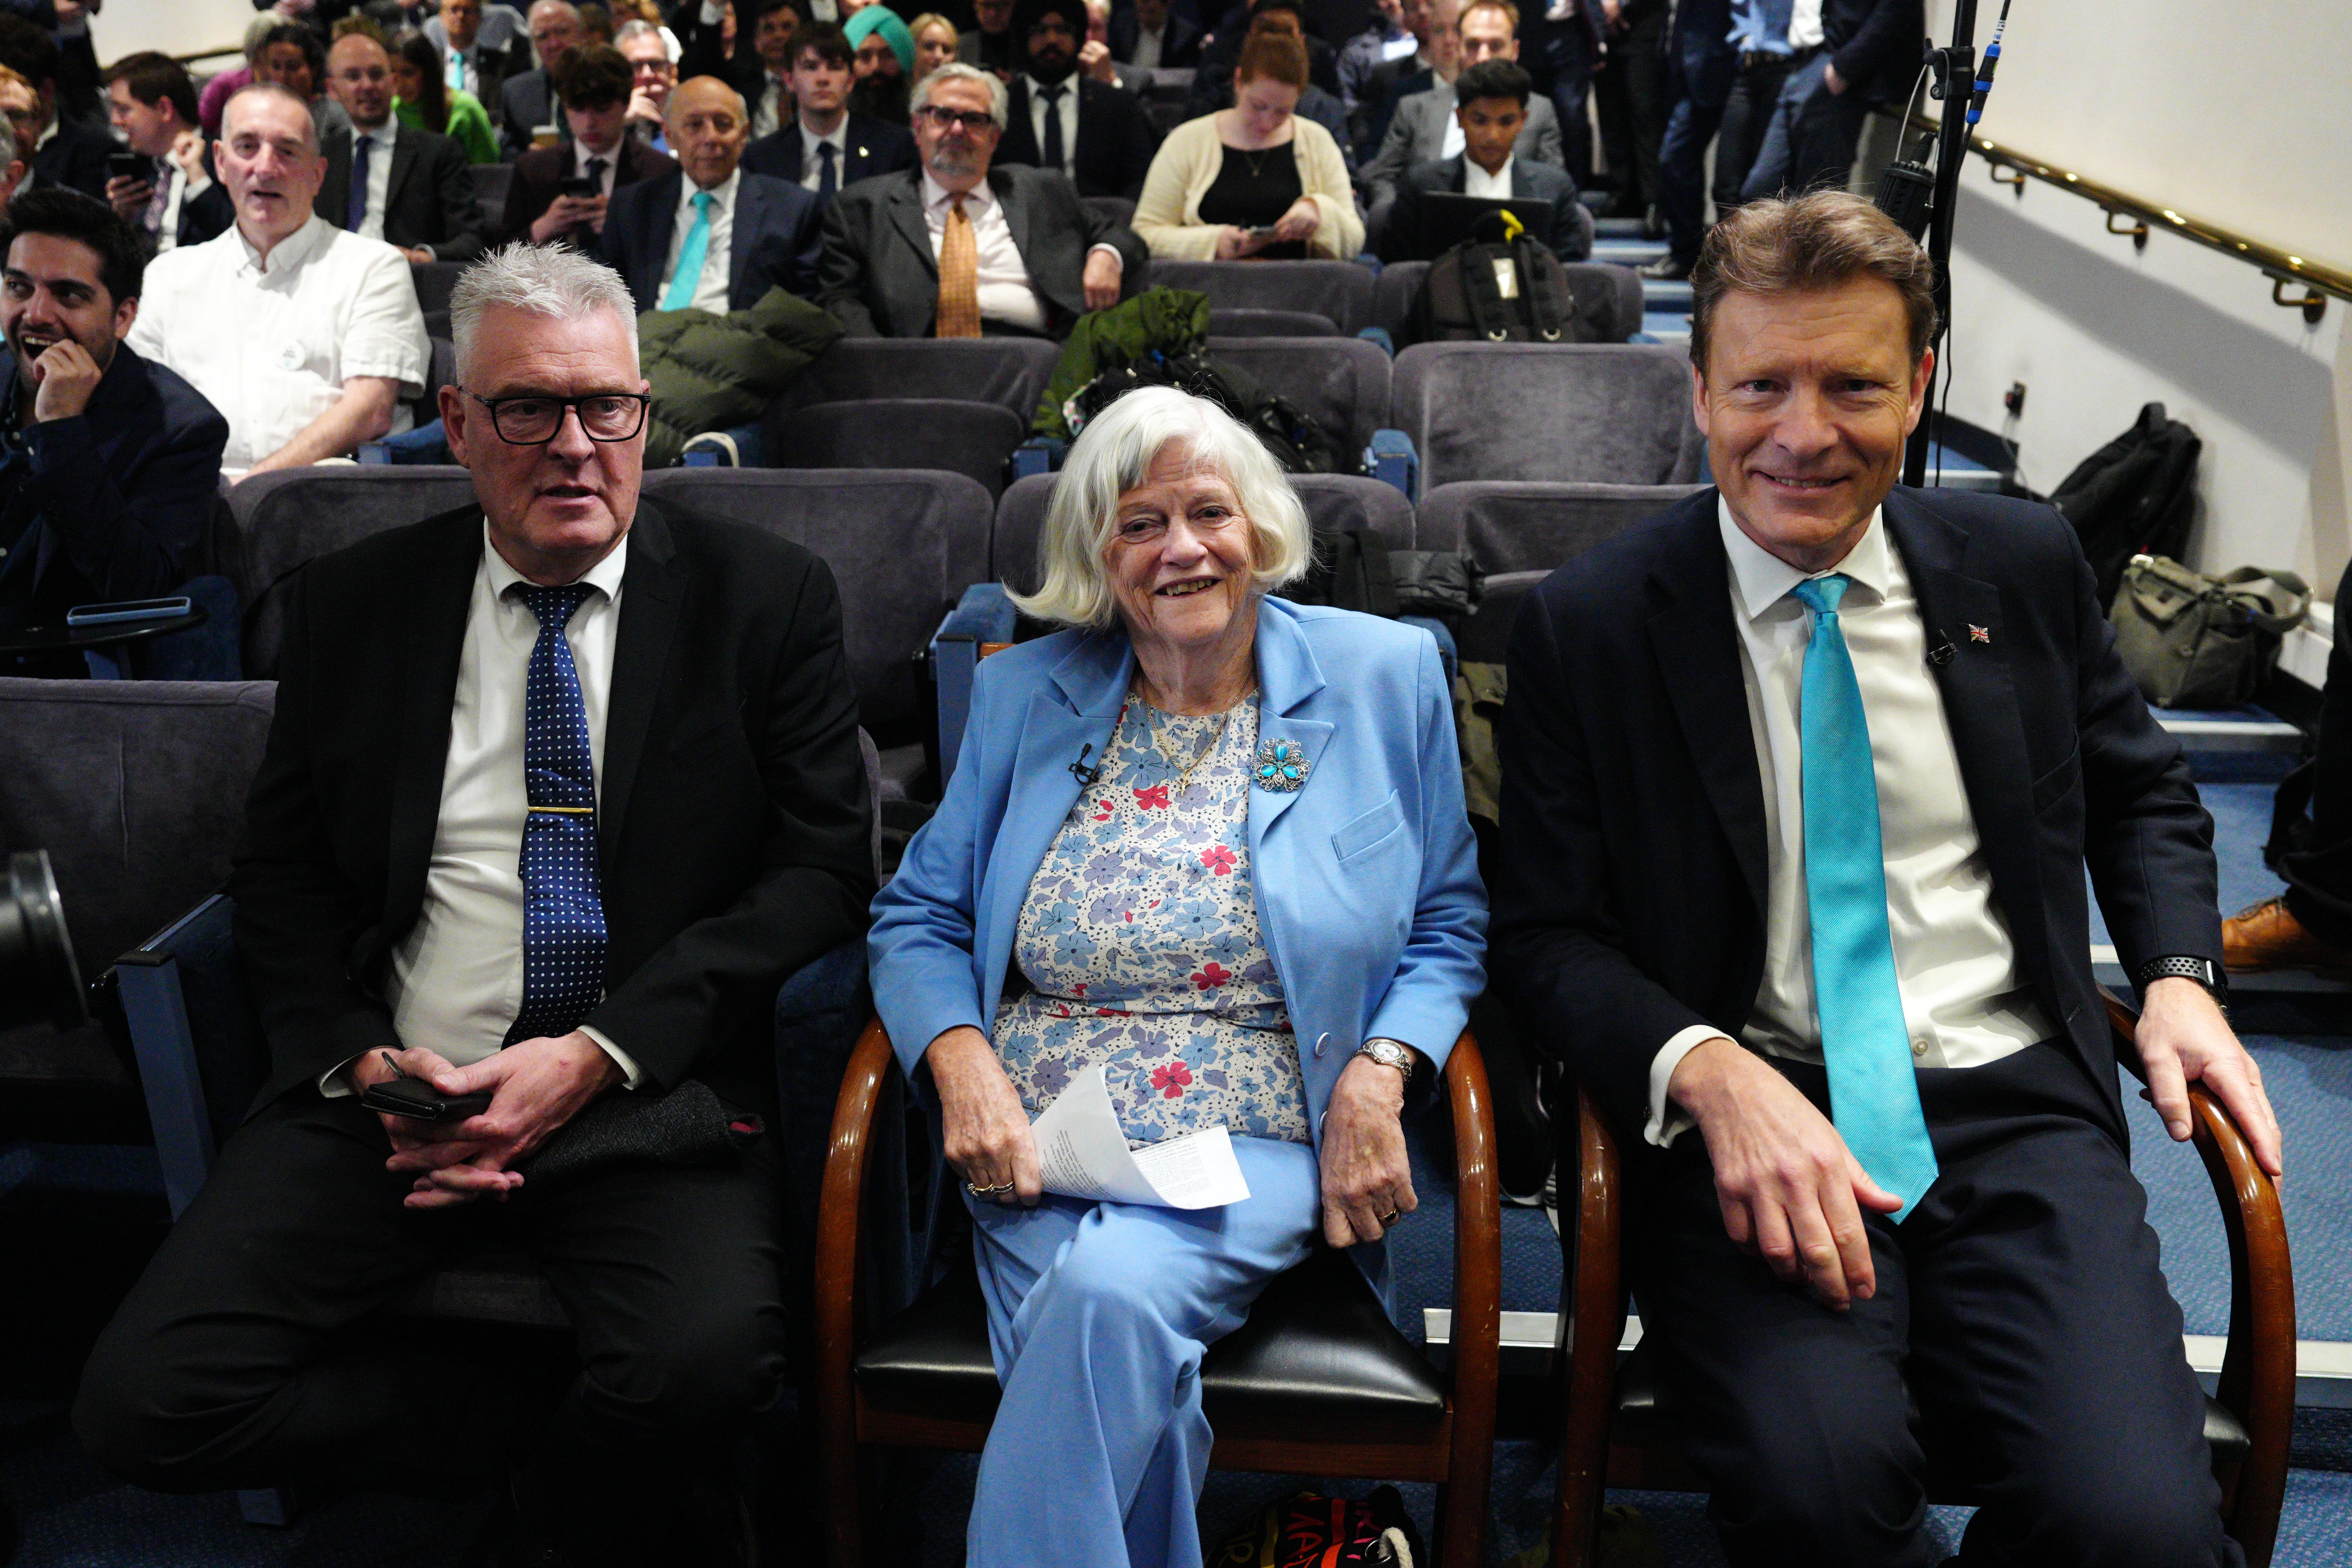 Lee Anderson, former MP Ann Widdecombe and Reform UK leader Richard Tice at the party election launch on Thursday